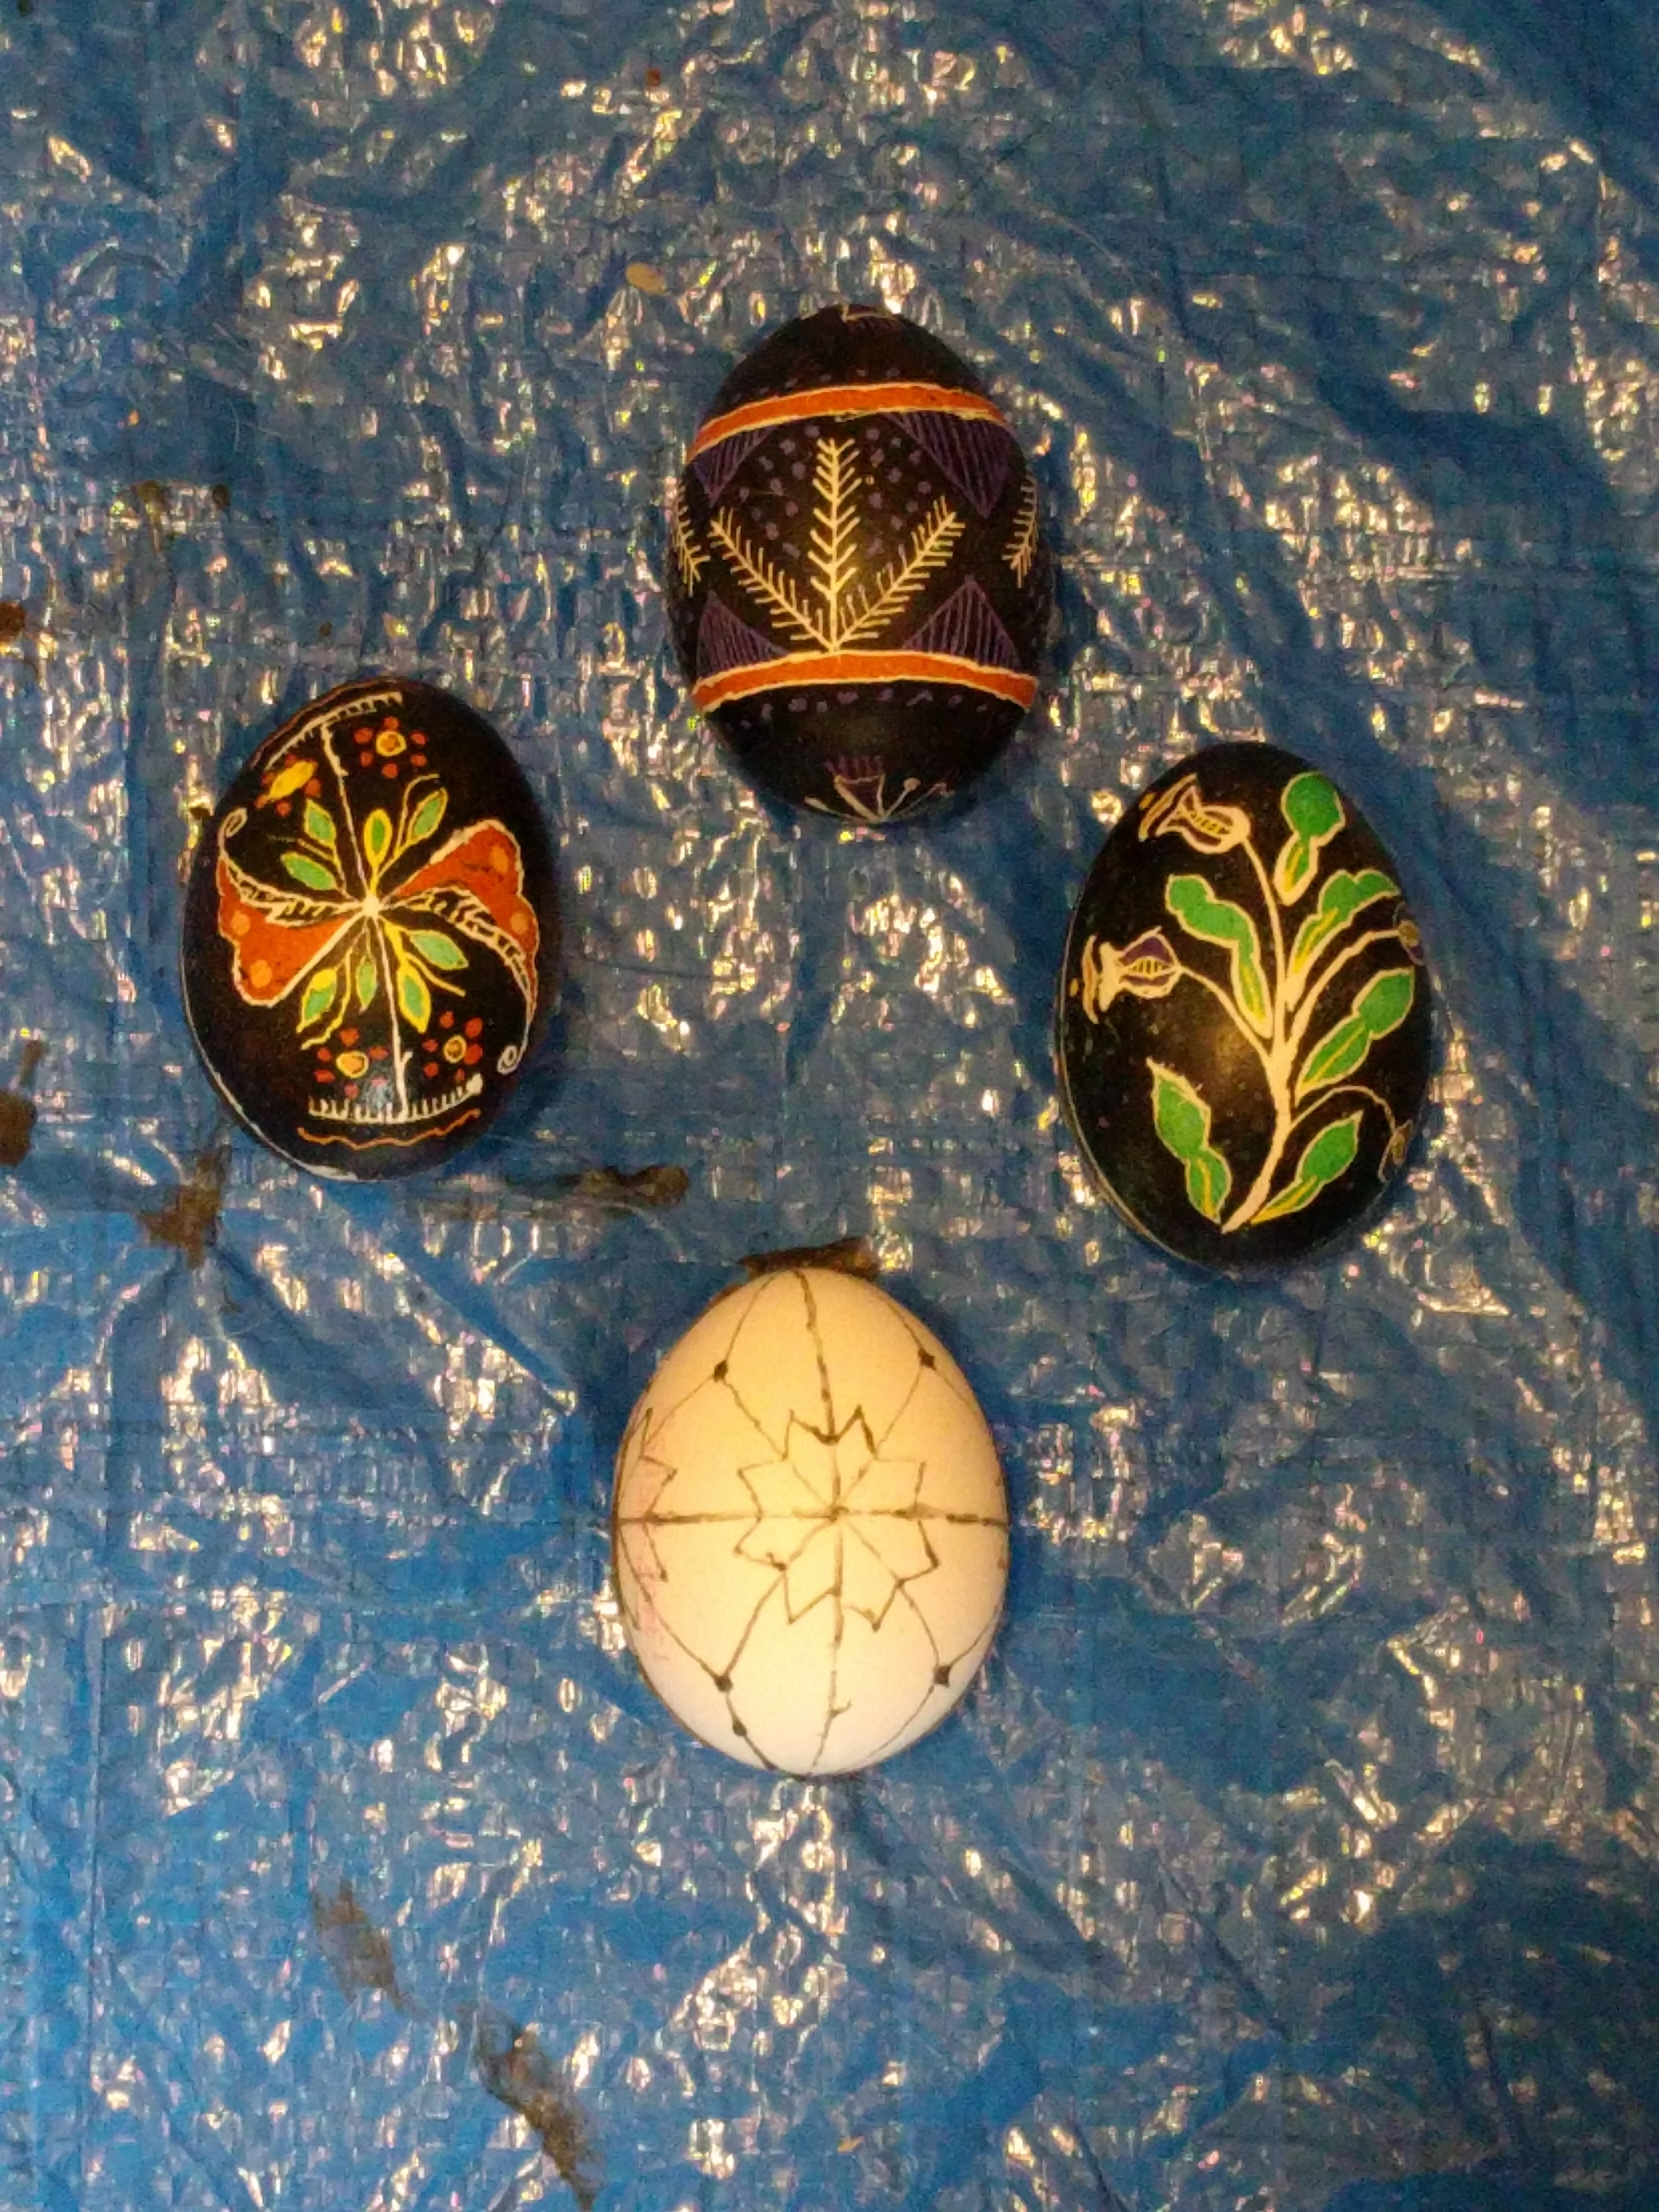 Four eggs on a blue tarp, flowery or with wheat sheaves, and one that isn't yet painted, but has some wax applied.